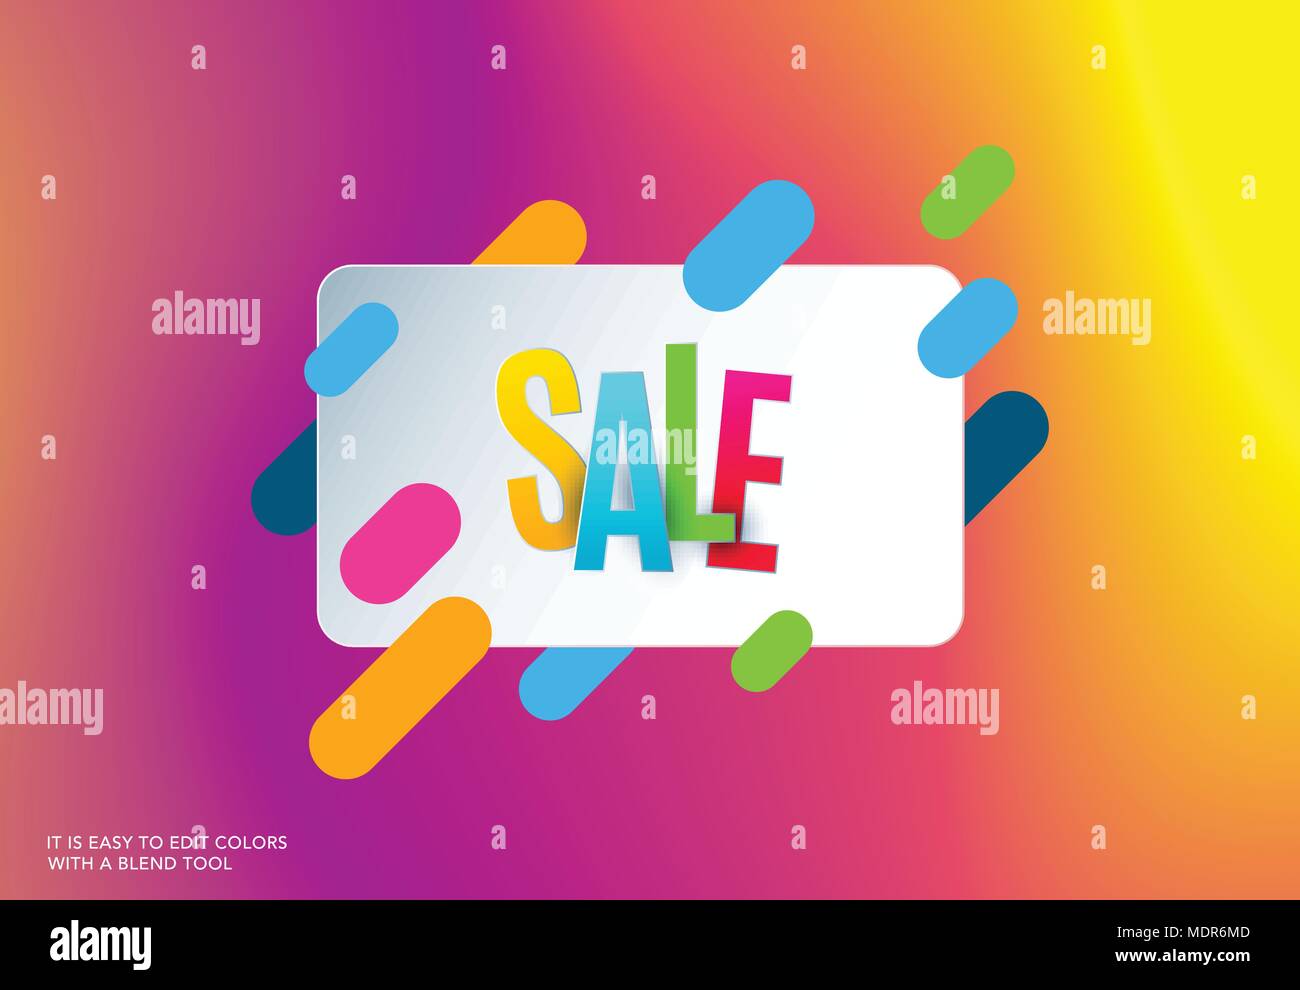 Sale banner template design on colourful background. Special offer for shopping, retail. Typography, lettering for website, flyer. Stock Vector